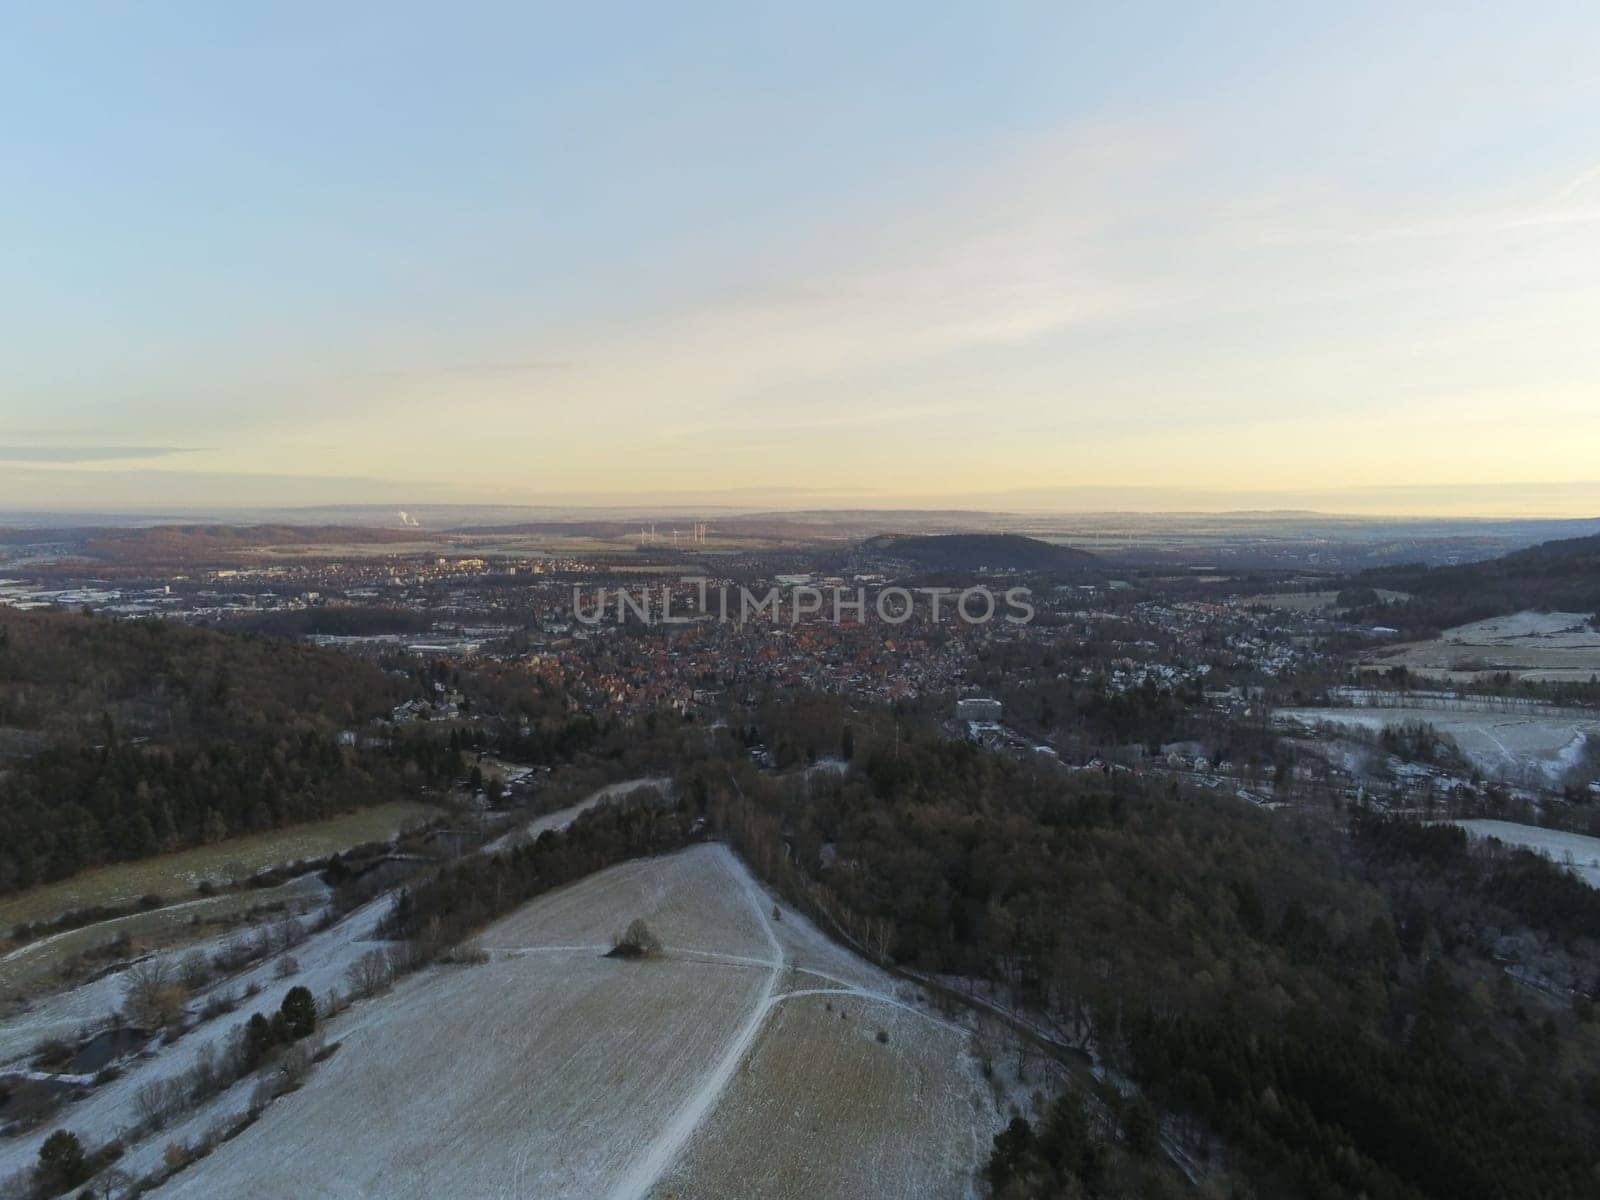 View of the city of Goslar in the Harz mountains photographed from the Steinberg in winter